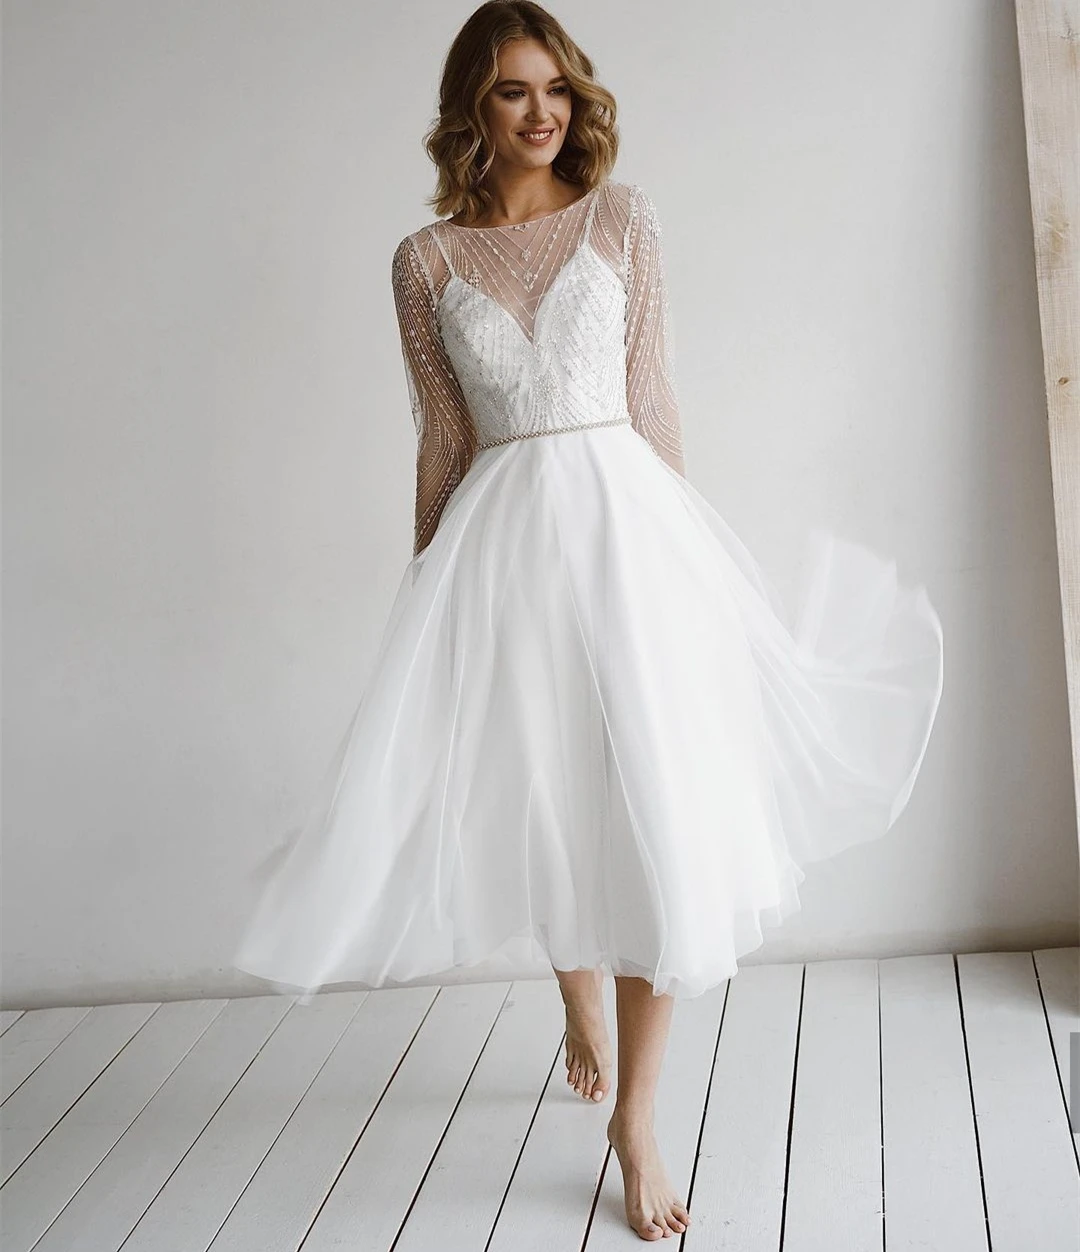 

Elegant A Line Short Wedding Dress 2023 Long Sleeves Beading Sashes Tassel Backless Appliques Party Gown Robe De Mariee Mid Calf